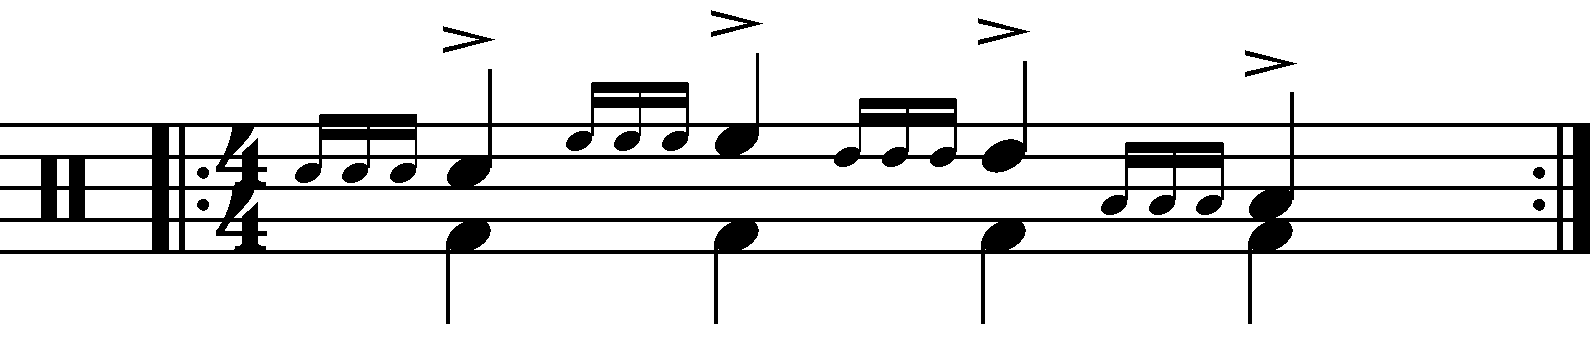 A Four Stroke Ruff moving in quarter notes